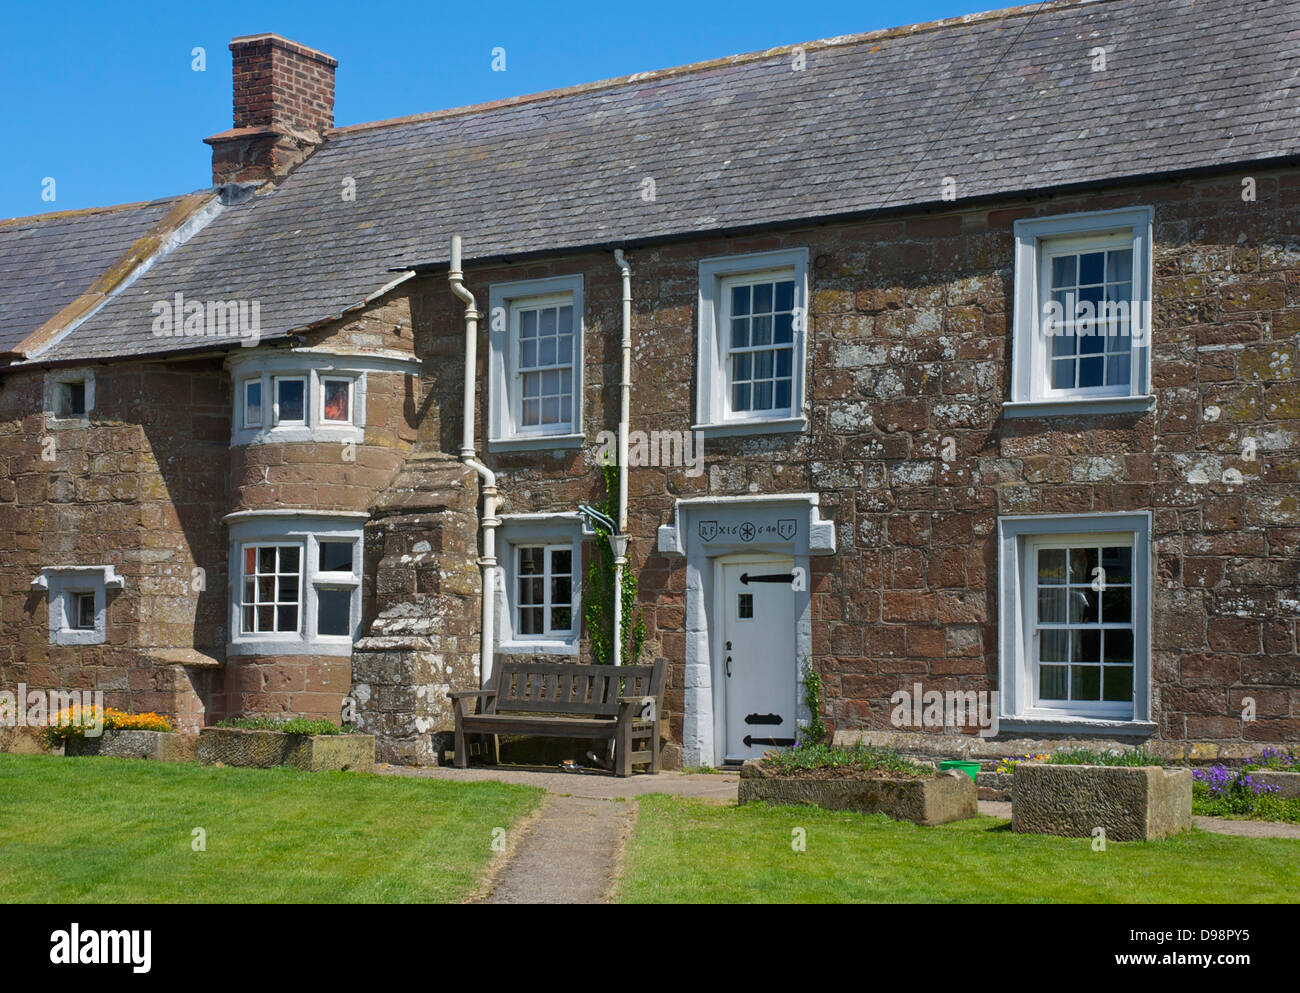 Sandstone house with a datestone of 1664, in the village of Abbeystead, Northern Cumbria, England UK Stock Photo